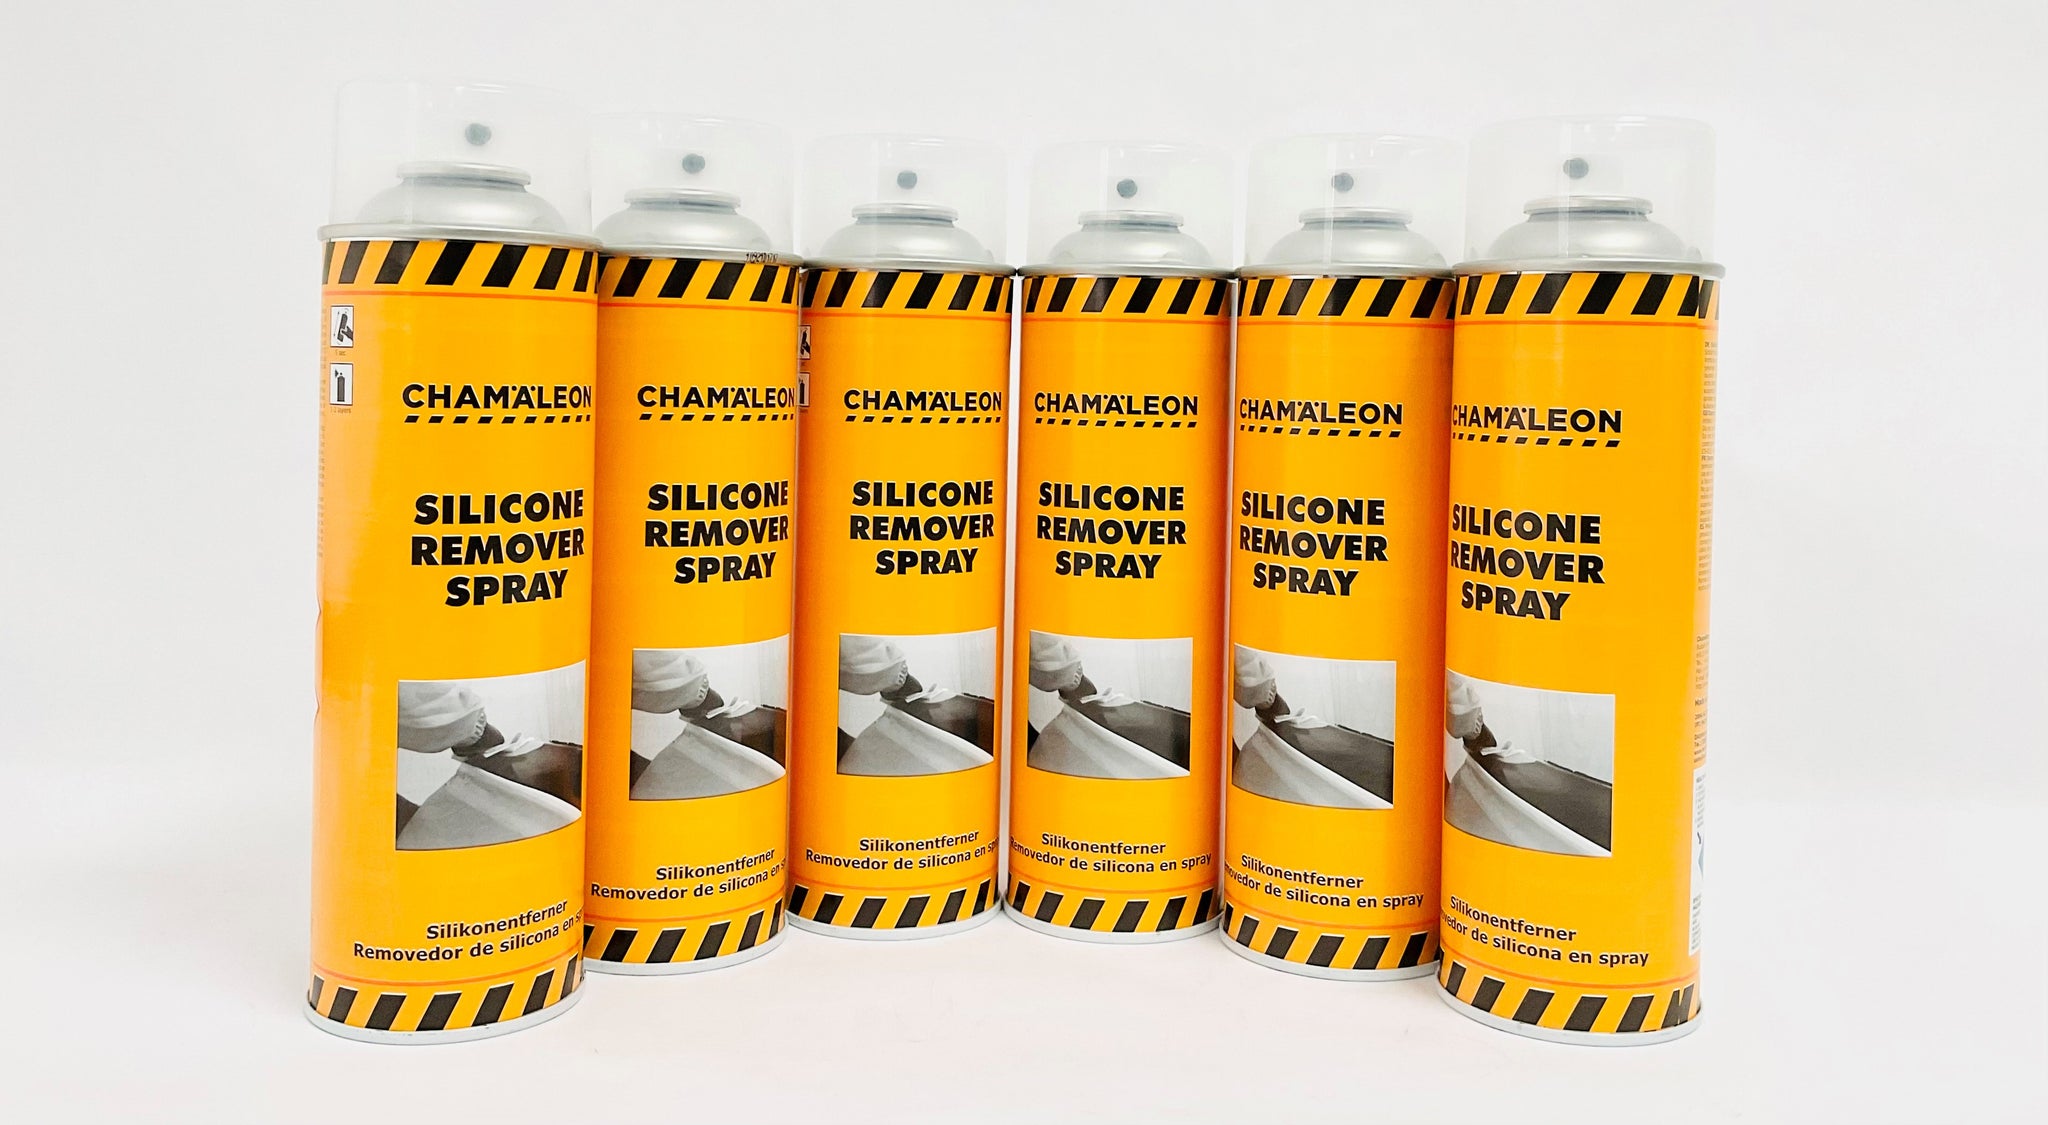 Aerosol Wax and Grease Remover